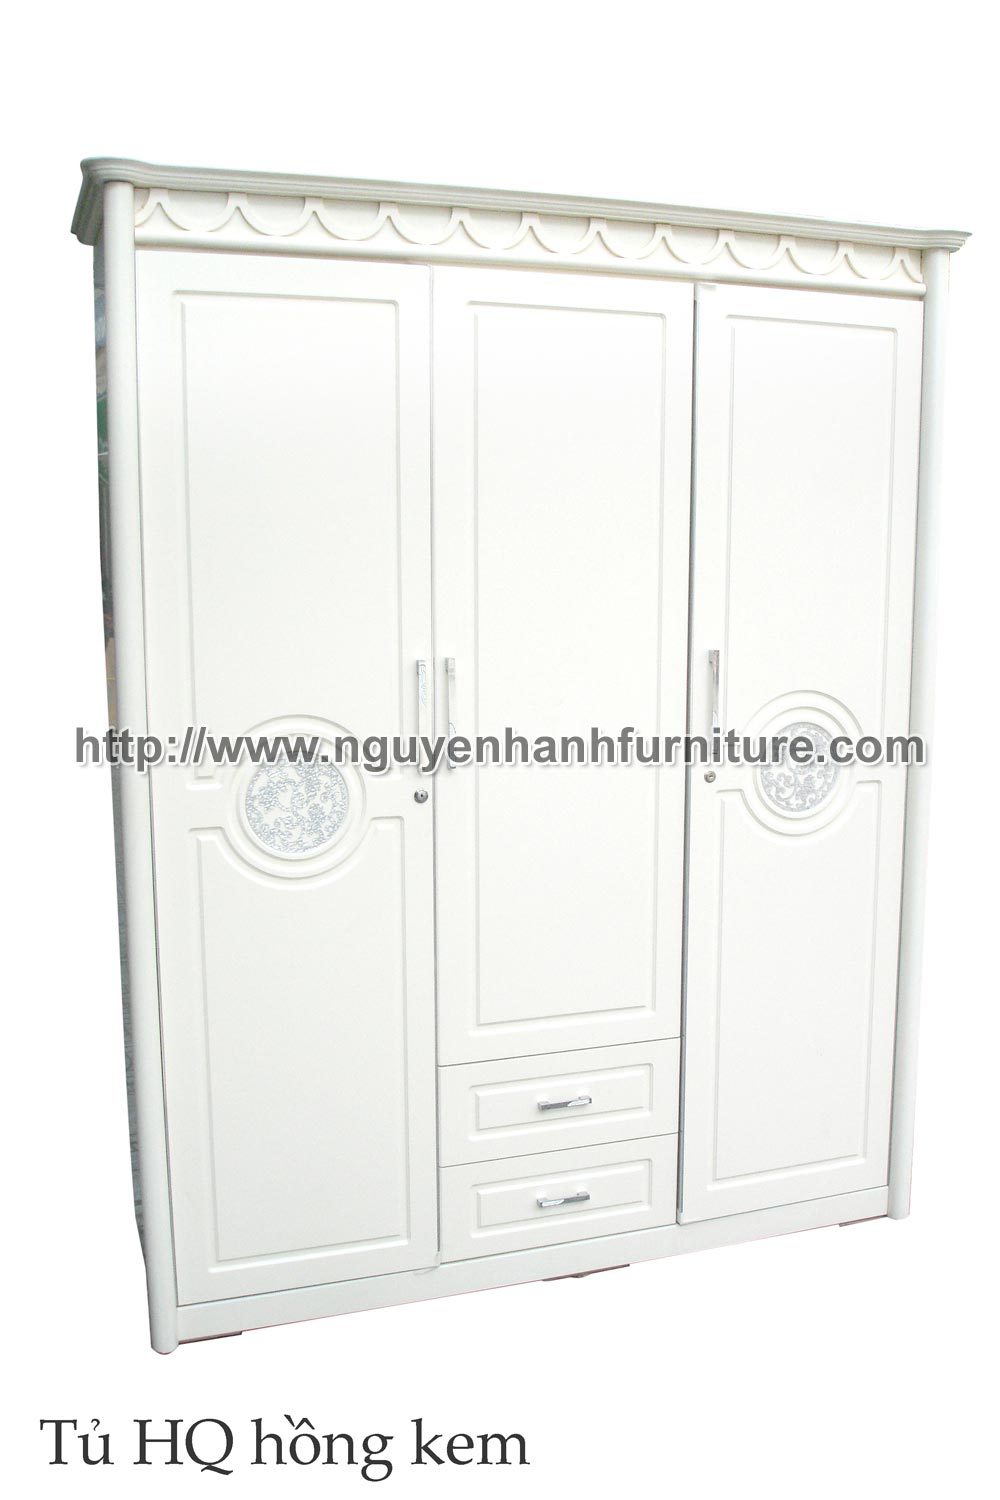 Name product: South Korean style Pinky cabinet 